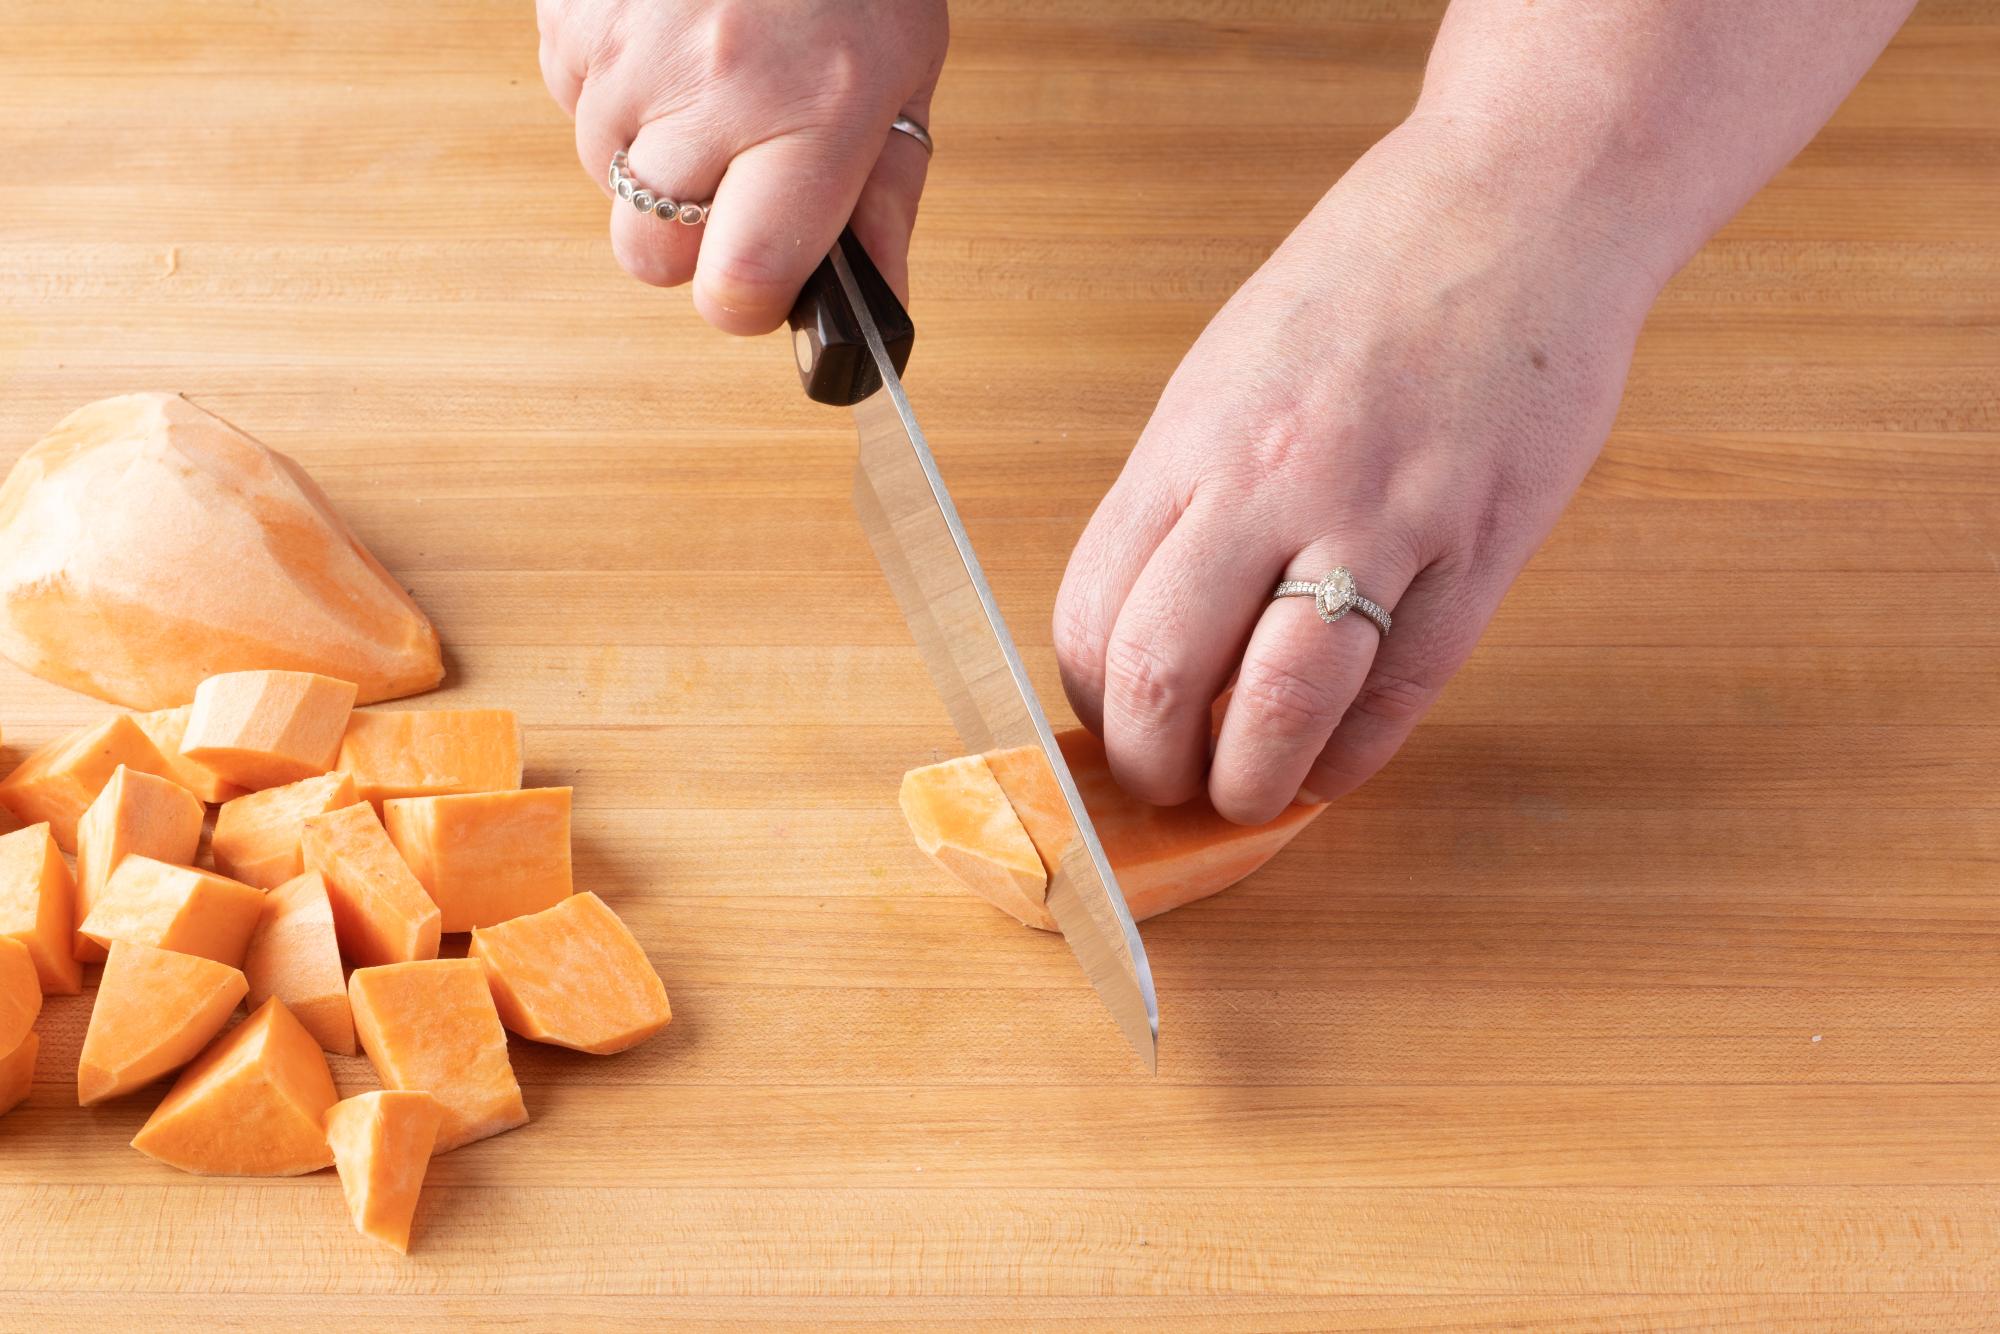 Cutting yams with a Hardy Slicer